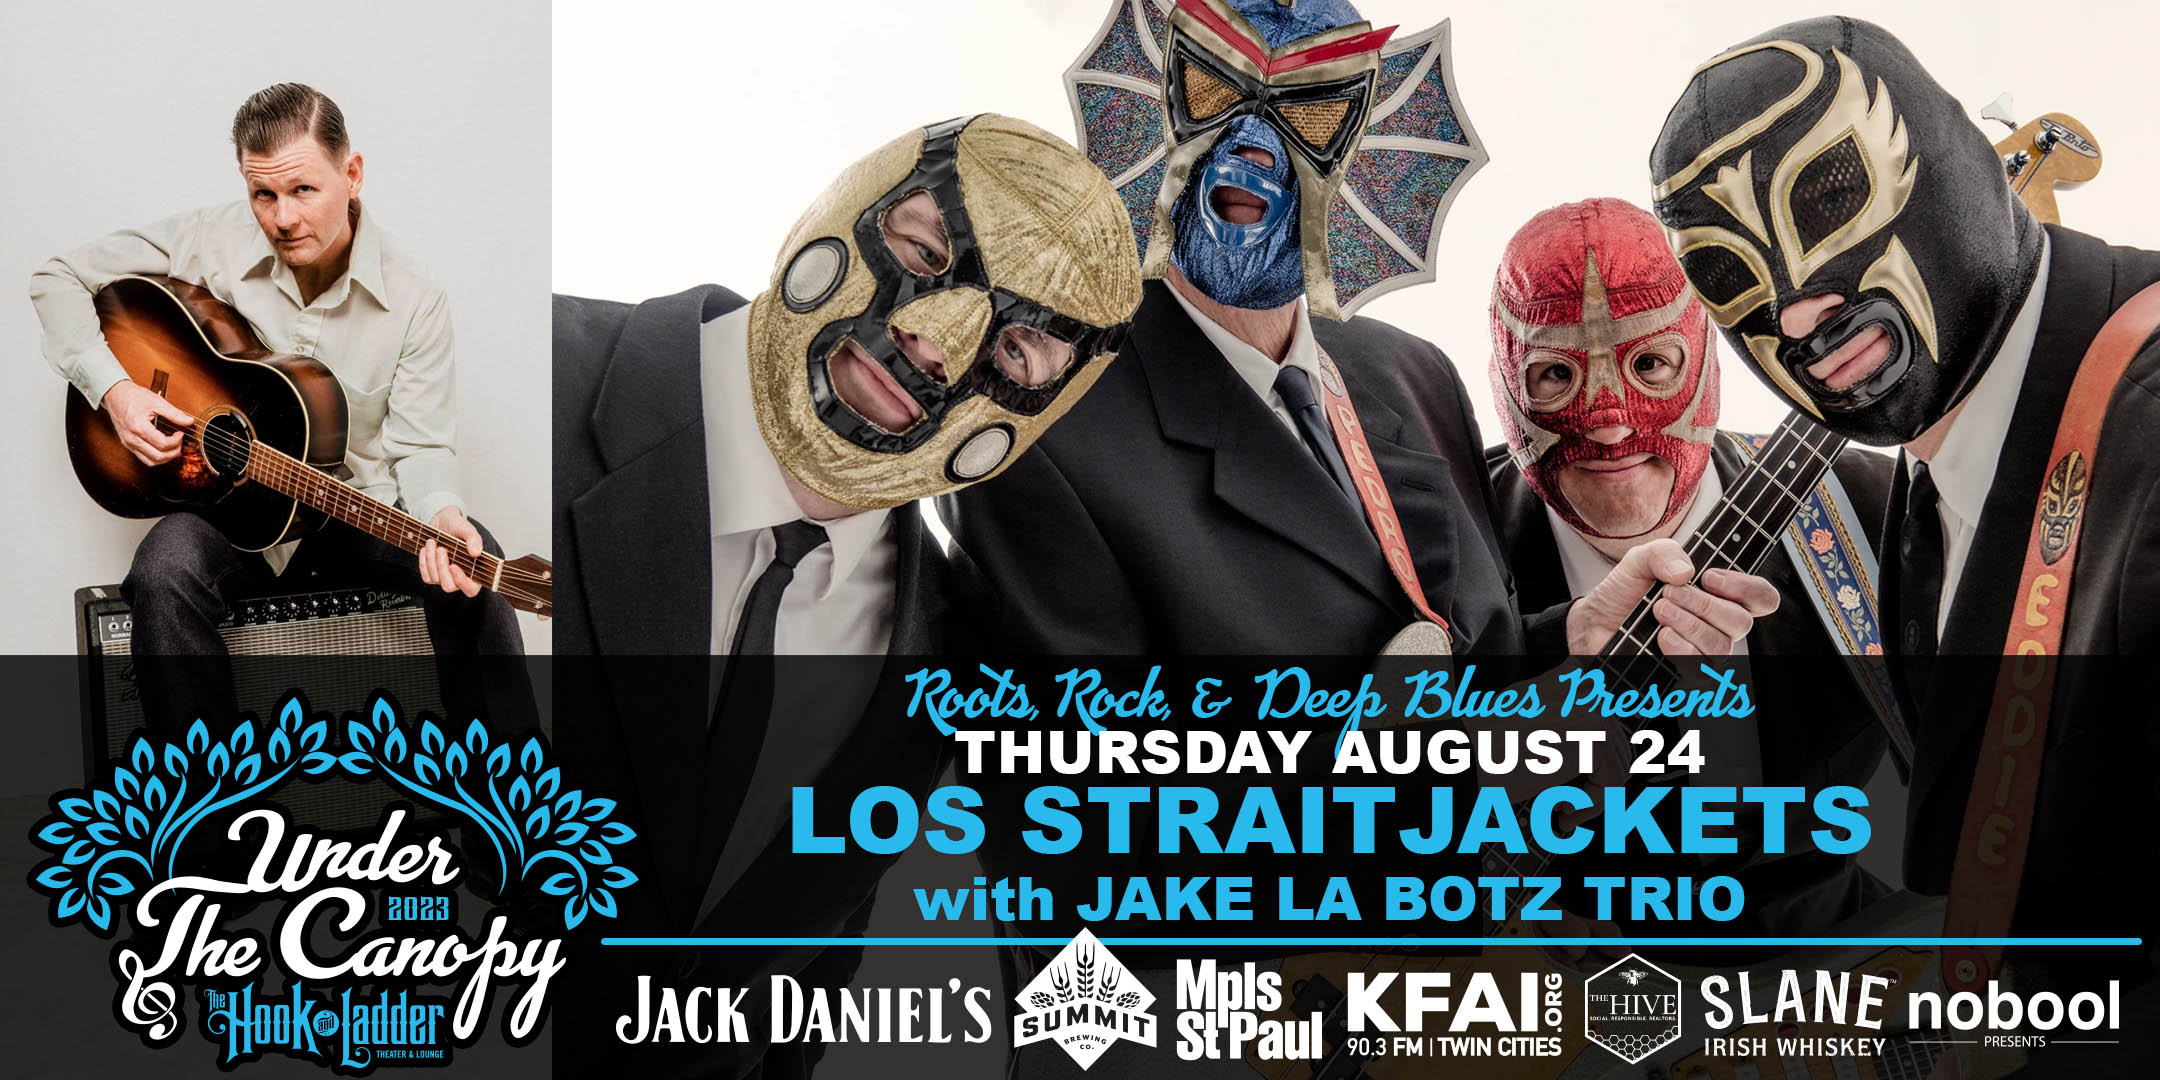 Los Straitjackets with Jake La Botz Trio Thursday, August 24, 2023 Under the Canopy at The Hook and Ladder Theater "An Urban Outdoor Summer Concert Series" Doors 6:00pm :: Music 7:00pm :: 21+ Reserved Seats: $40 GA: $25 ADV / $30 DOS